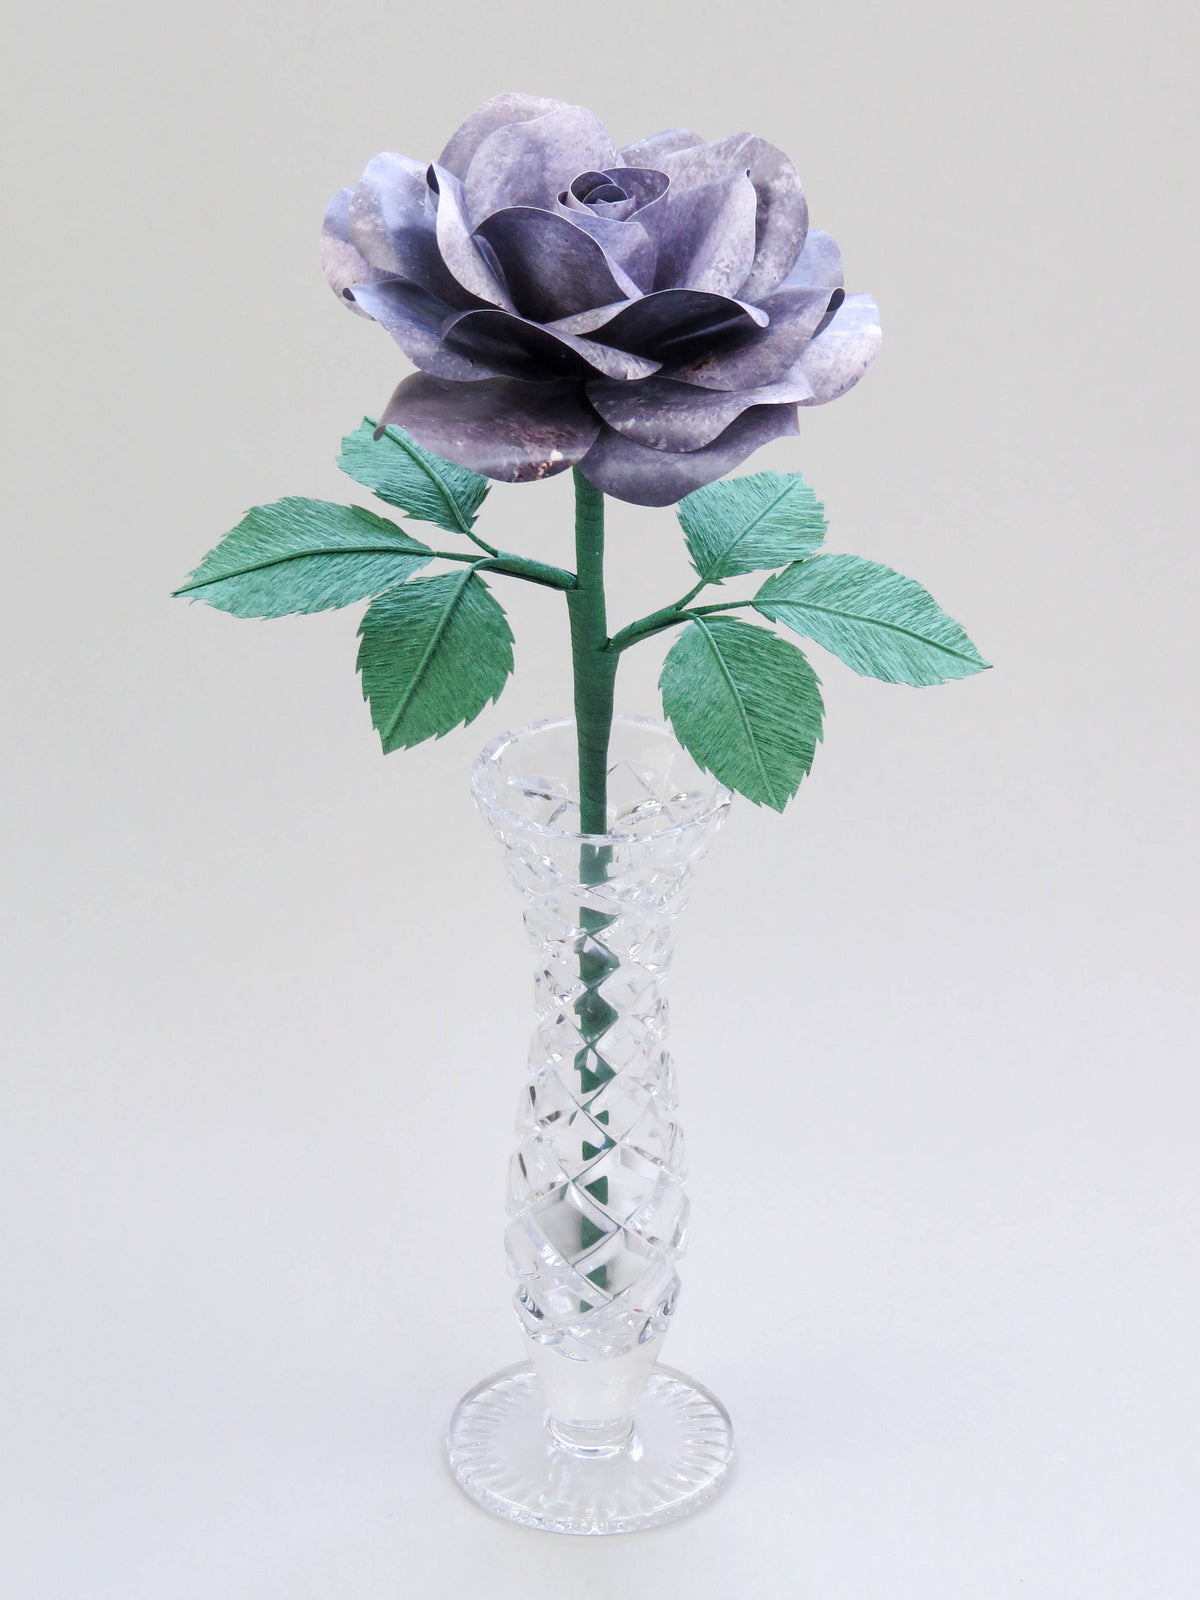 Grey iron paper rose with six forest green leaves standing in a narrow glass vase set against a light grey background